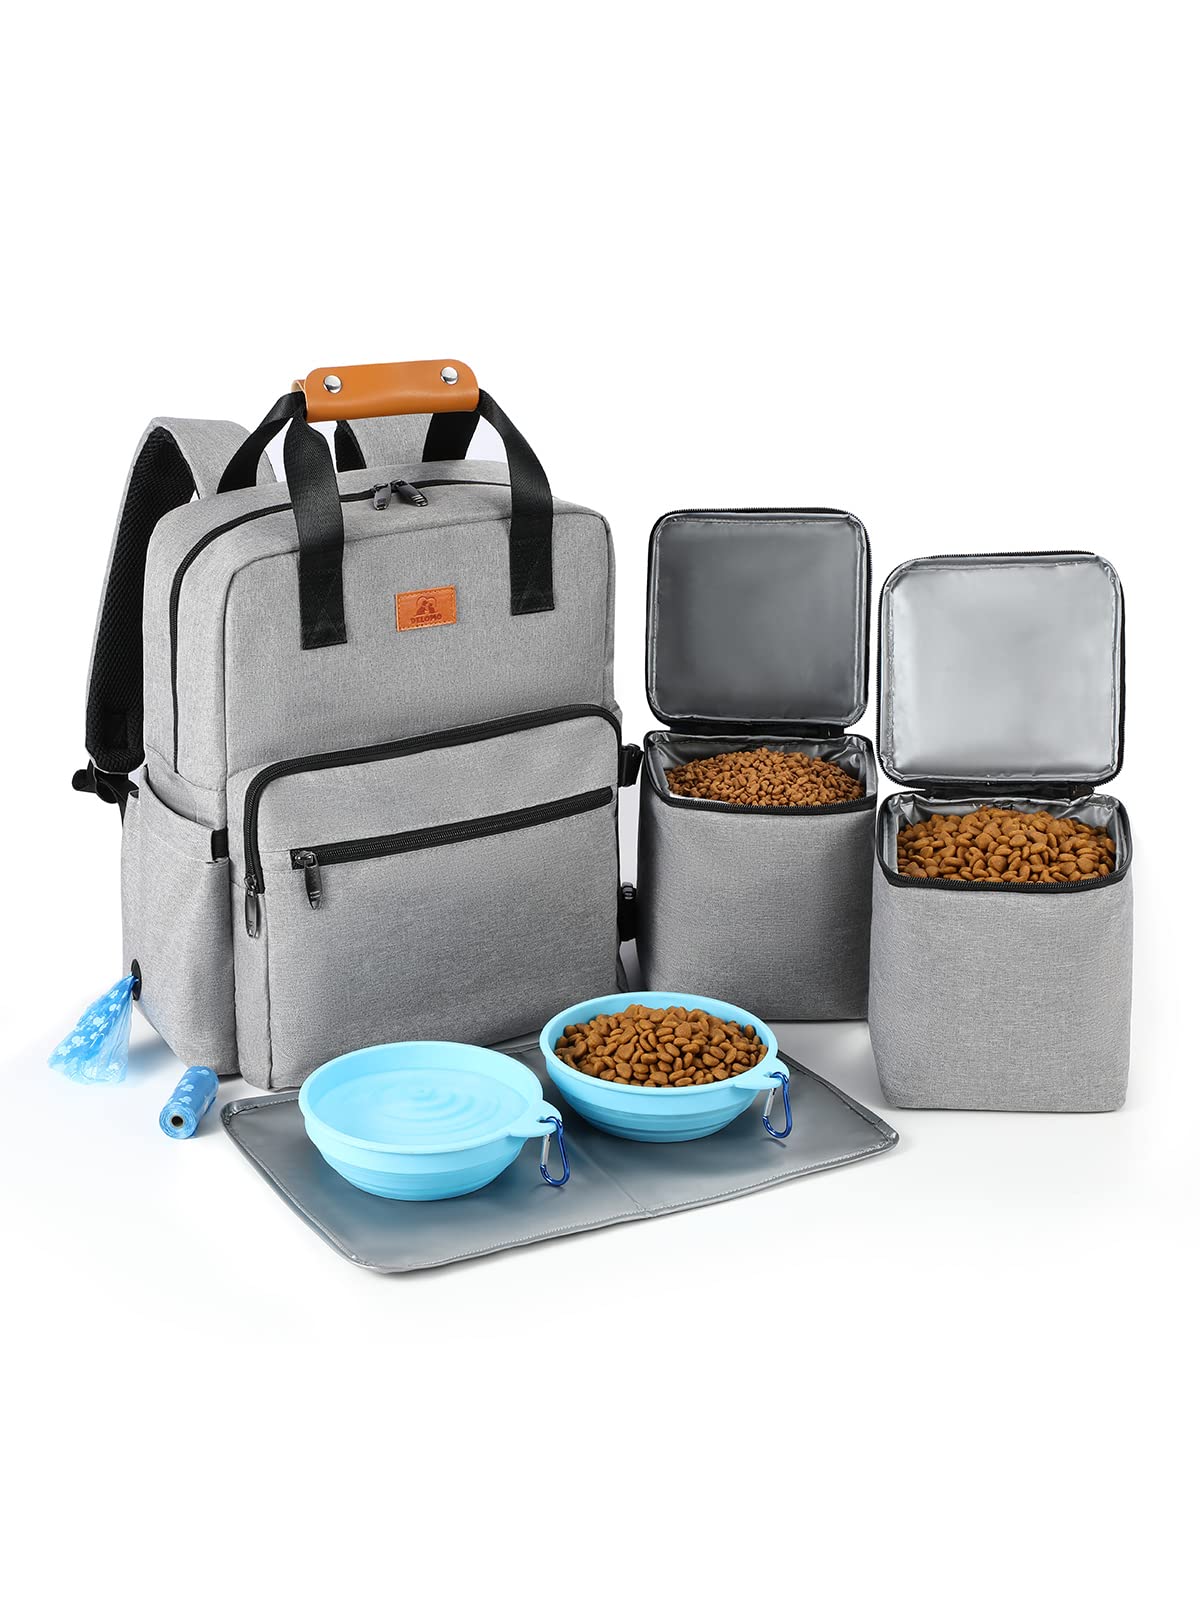 6.6-Gallon DELOMO Dog/Cat Food & Accessories Travel Bag w/ 2 Food Storage Bags & Collapsible Bowls $24.90 + Free Shipping